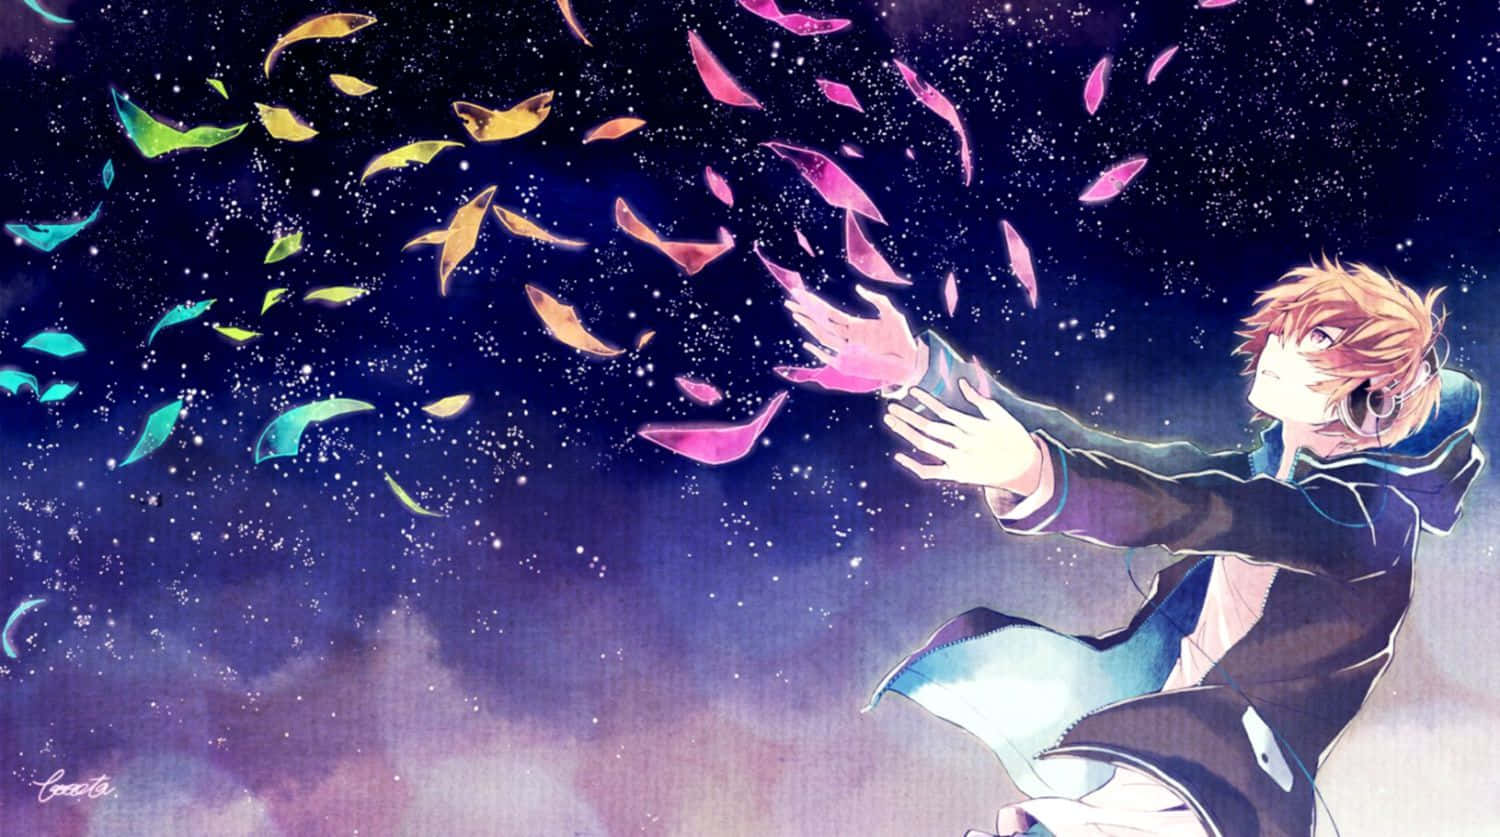 A Shot Of A Teenage Boy In Adorable Anime Style Wallpaper